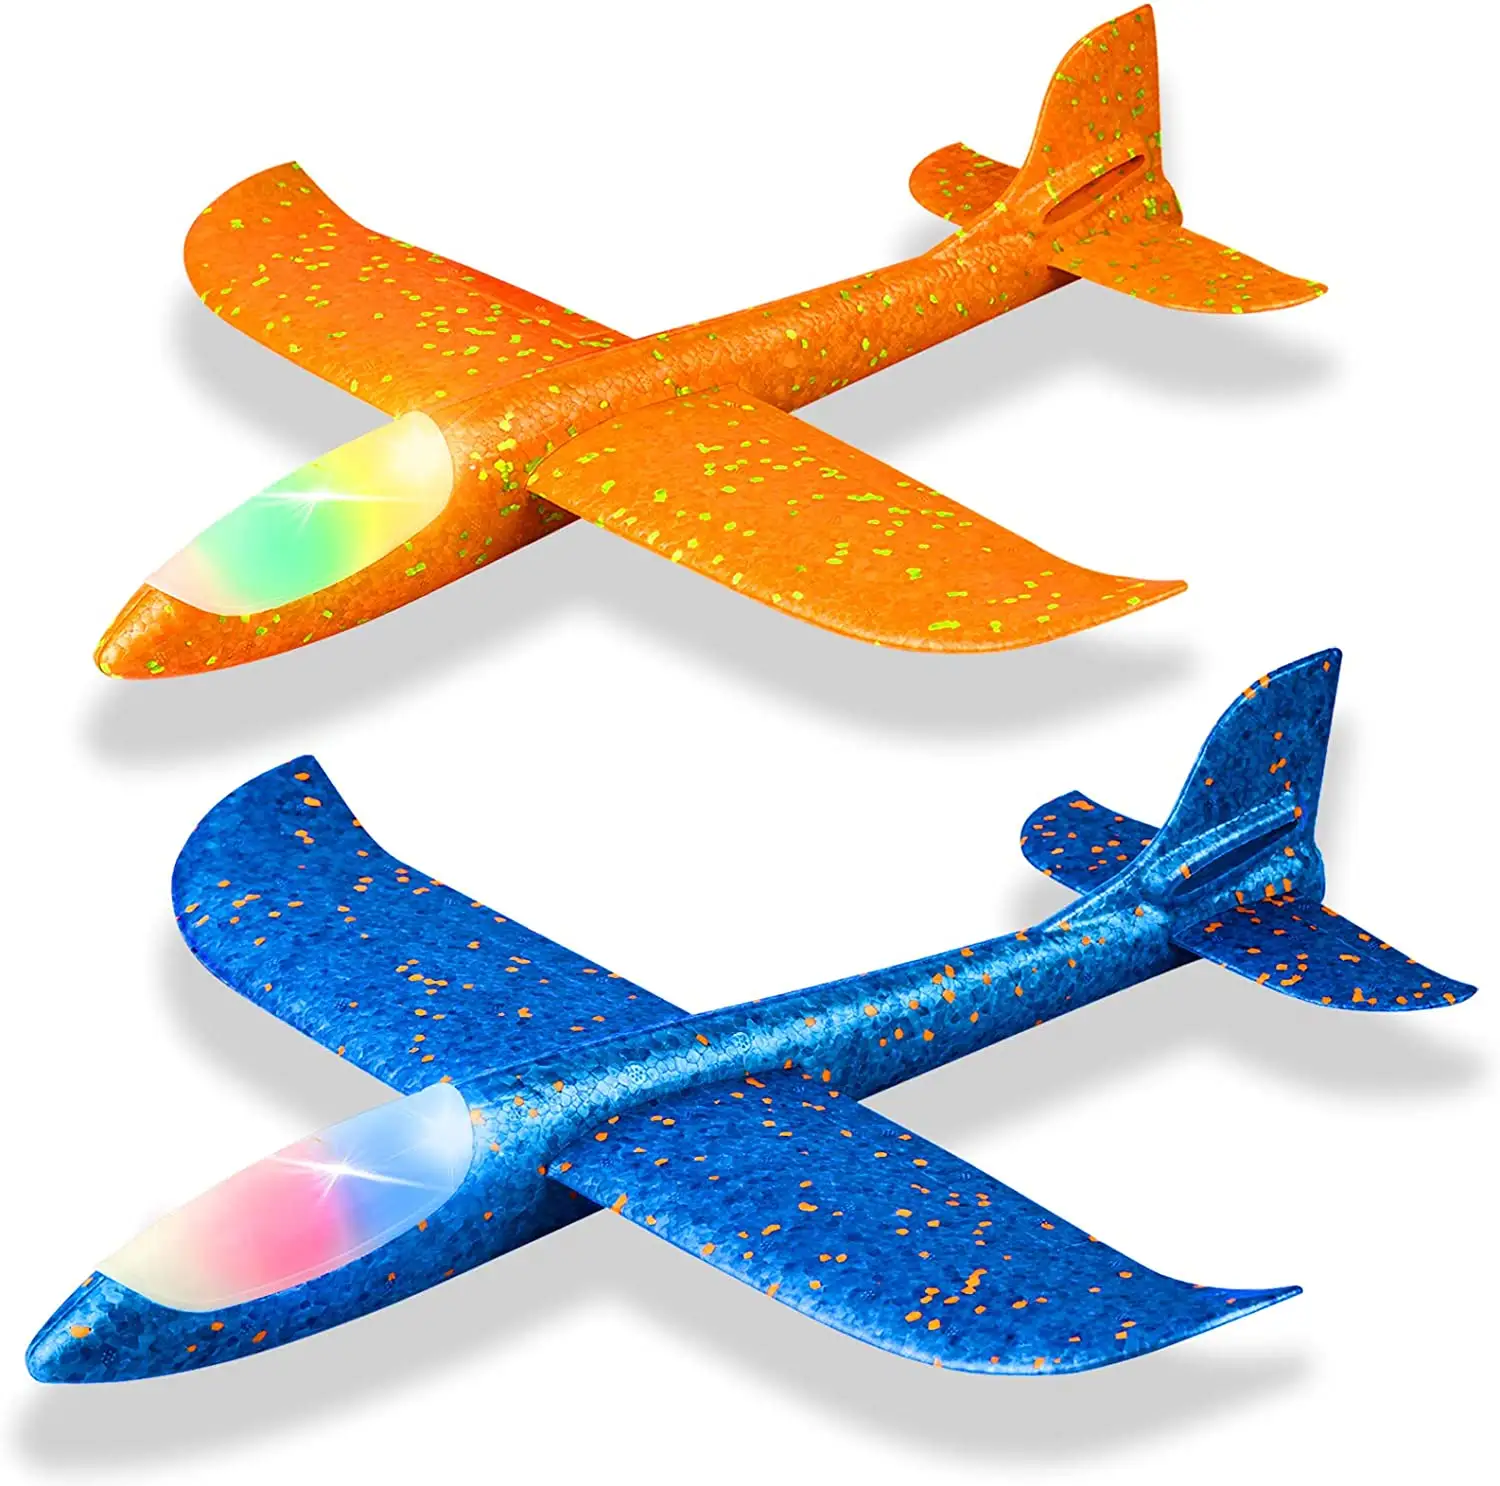 Amazon Hot Sale 48cm EPP Foam Airplane Hand Throwing Flying Plane Model Toy with LED